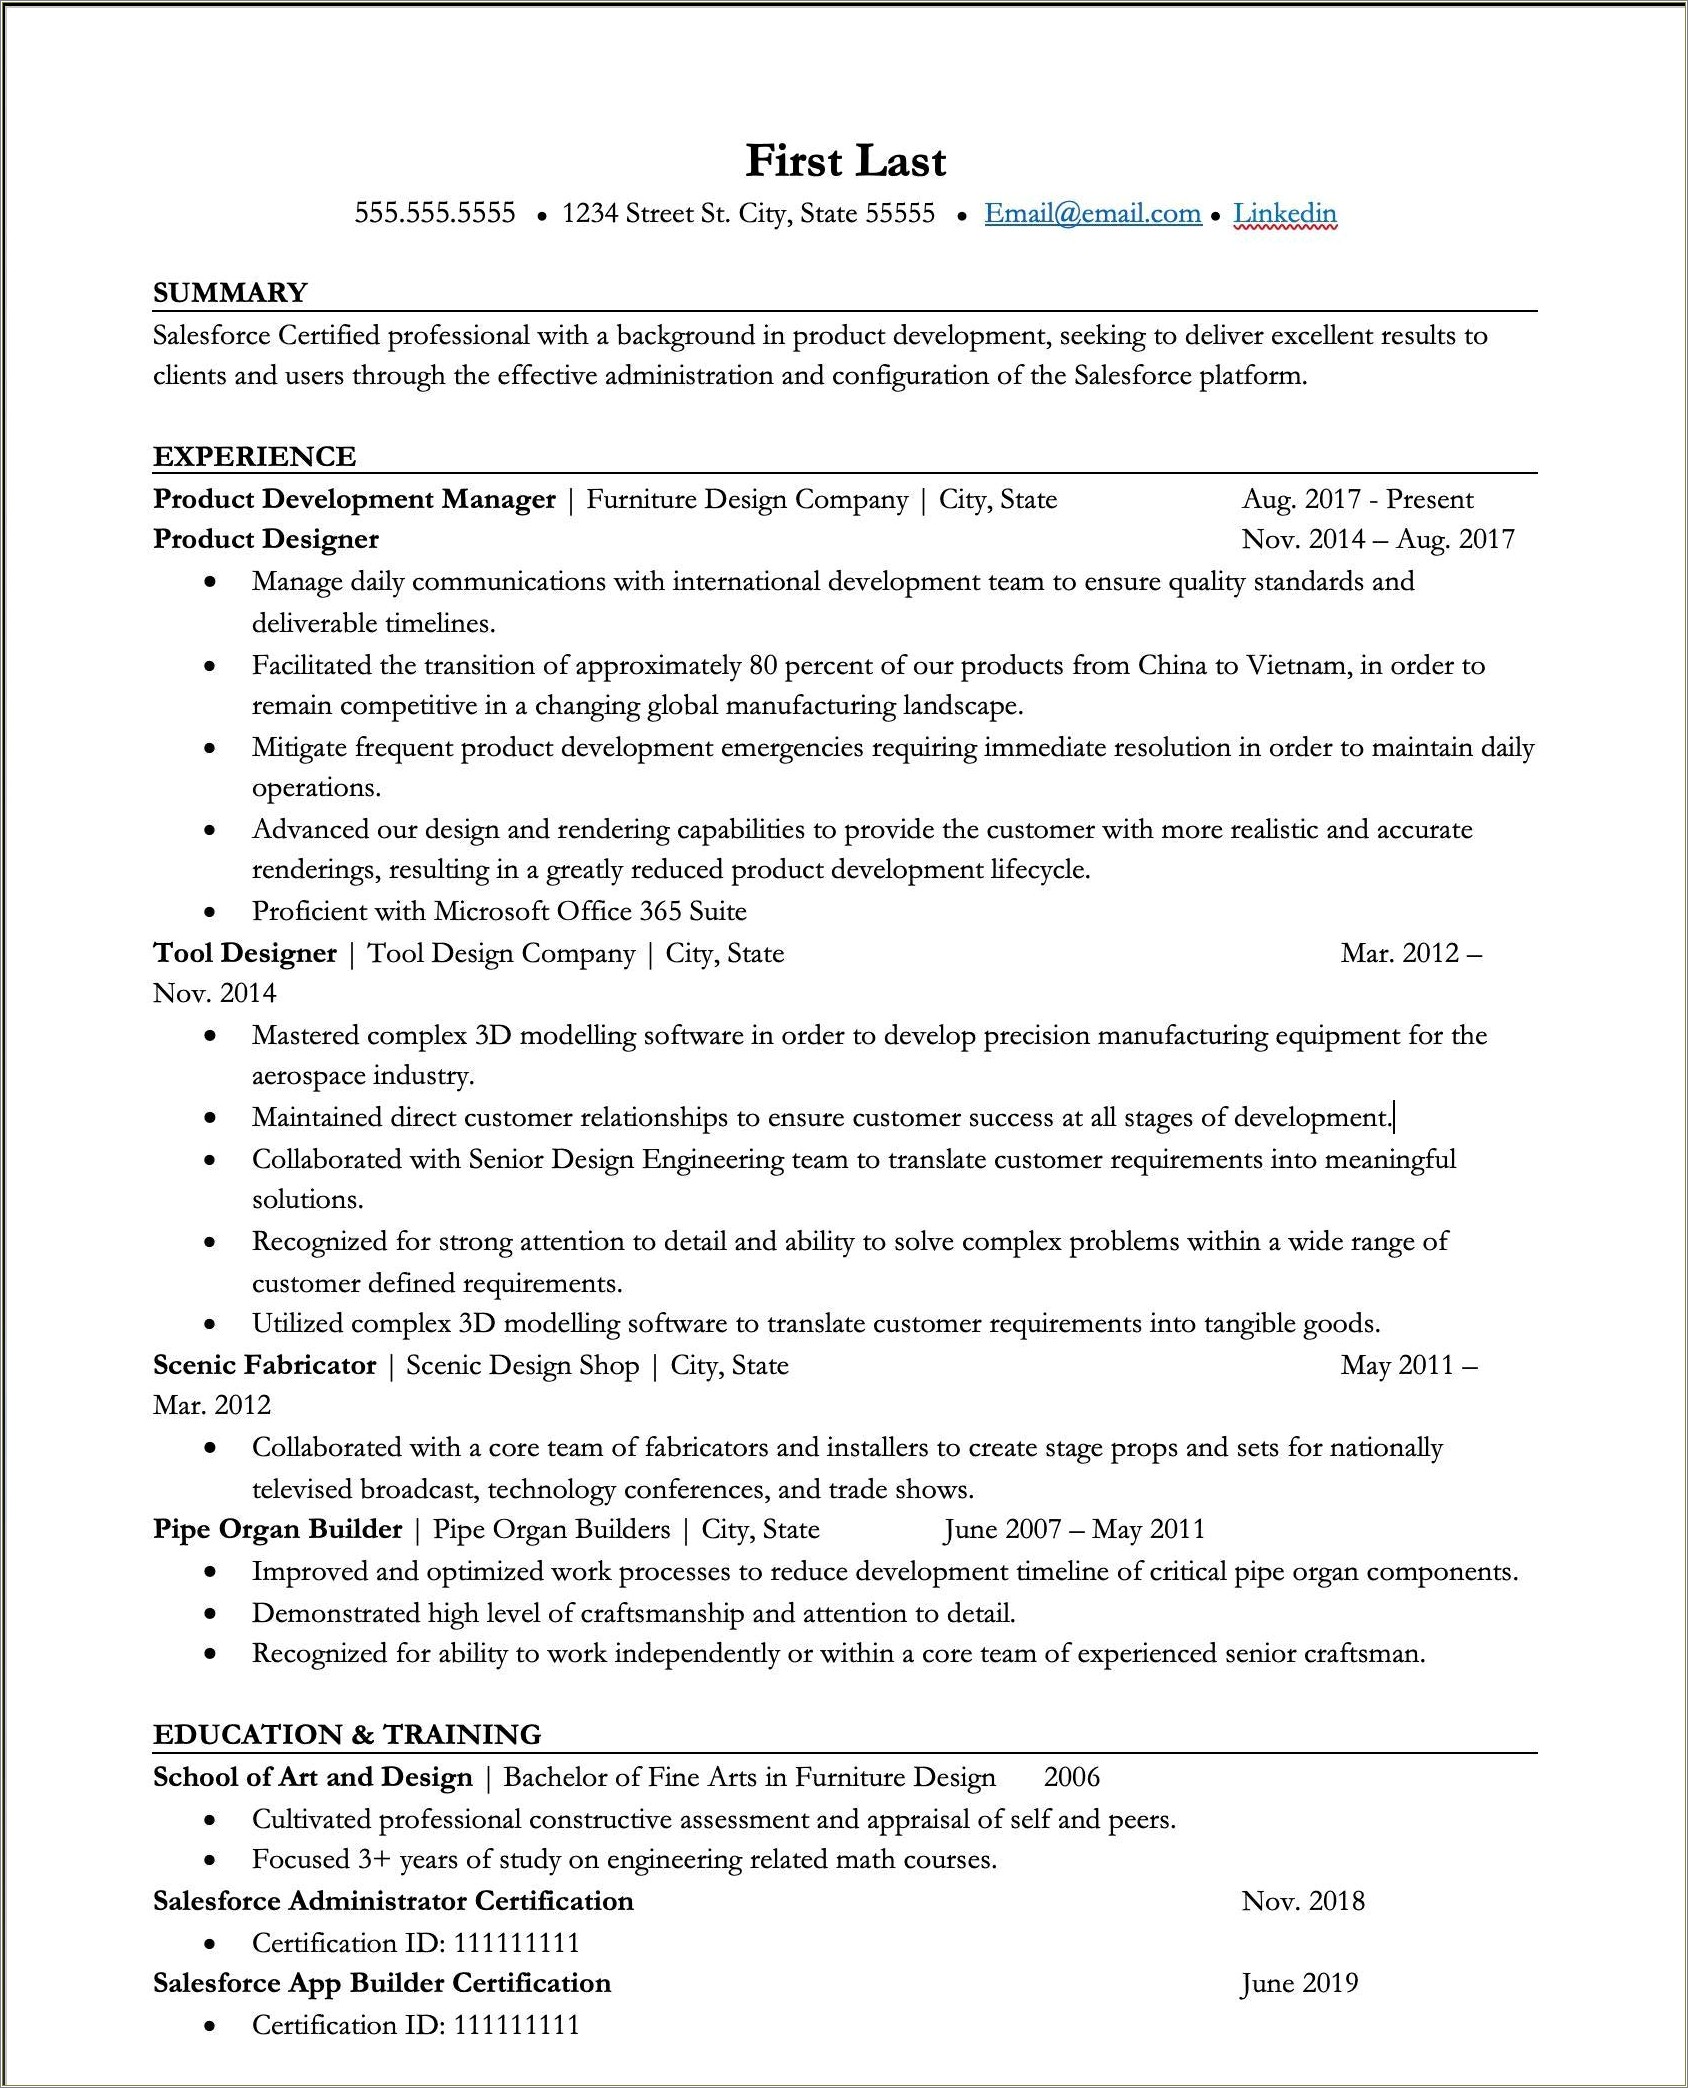 Salesforce Admin Resume For 1 Year Experience